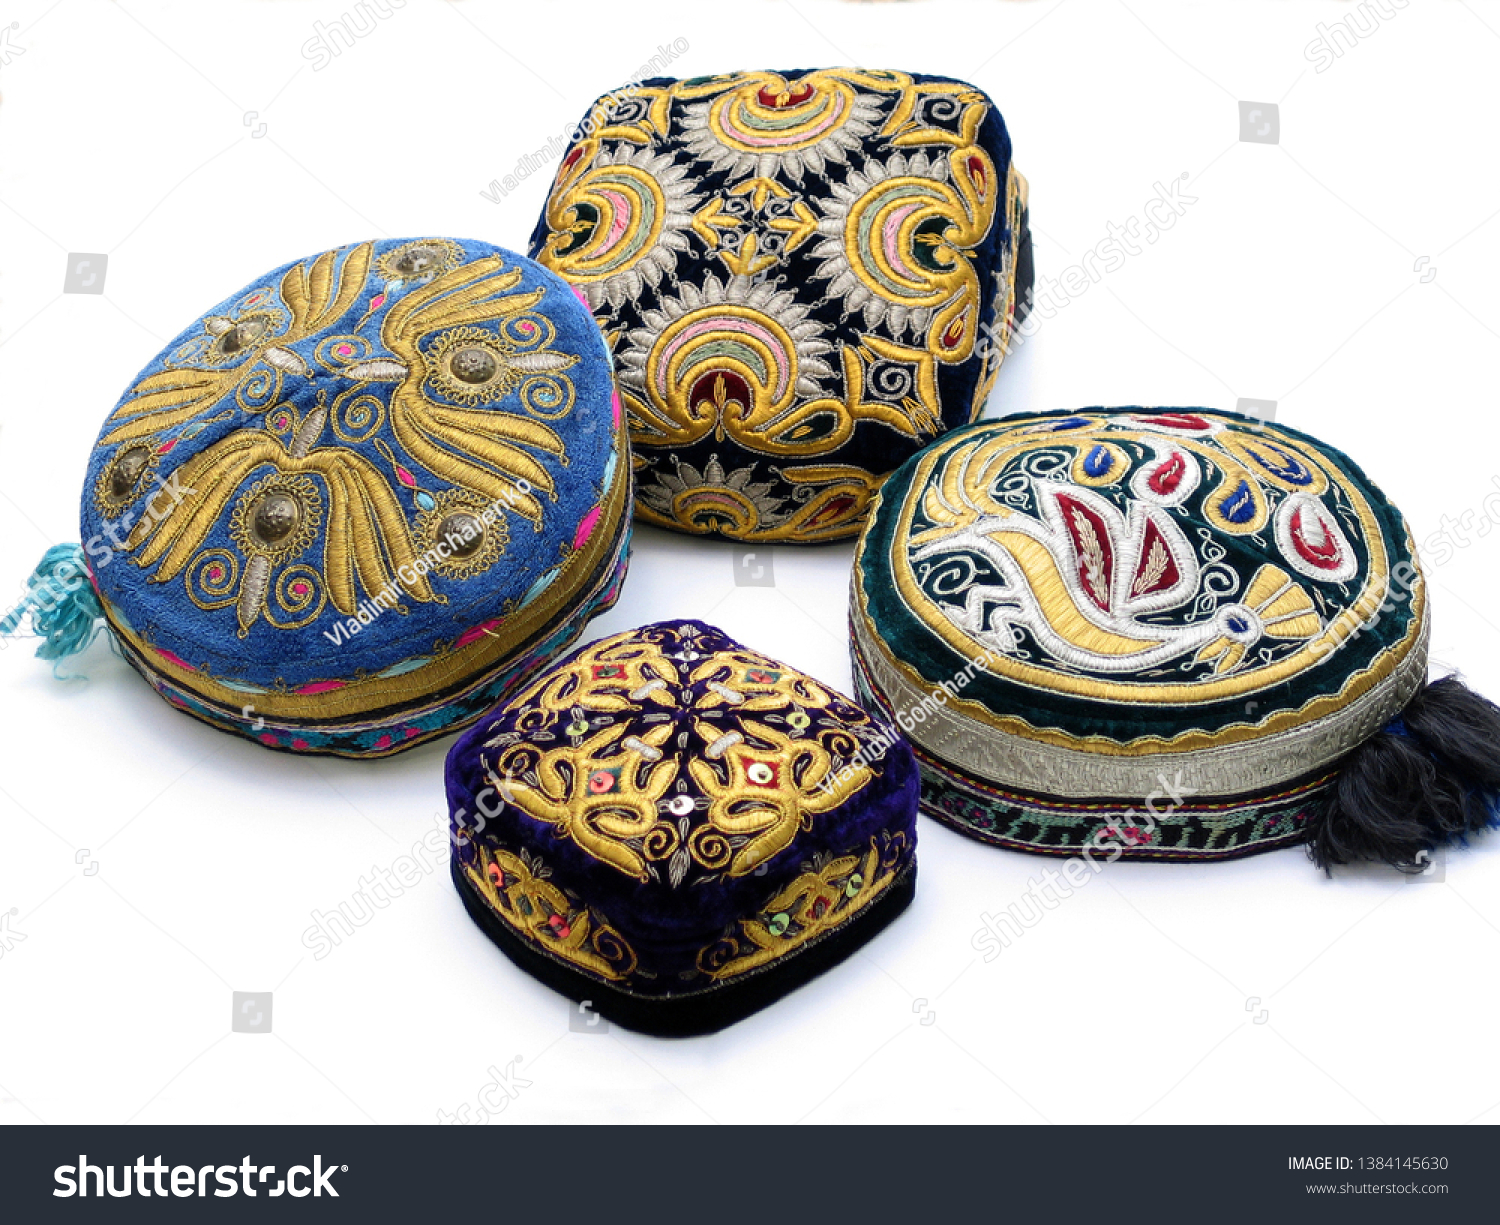 The traditional Uzbek hat, called a skullcap,or Duppi, is decorated with colorful embroidery on the white background    #1384145630